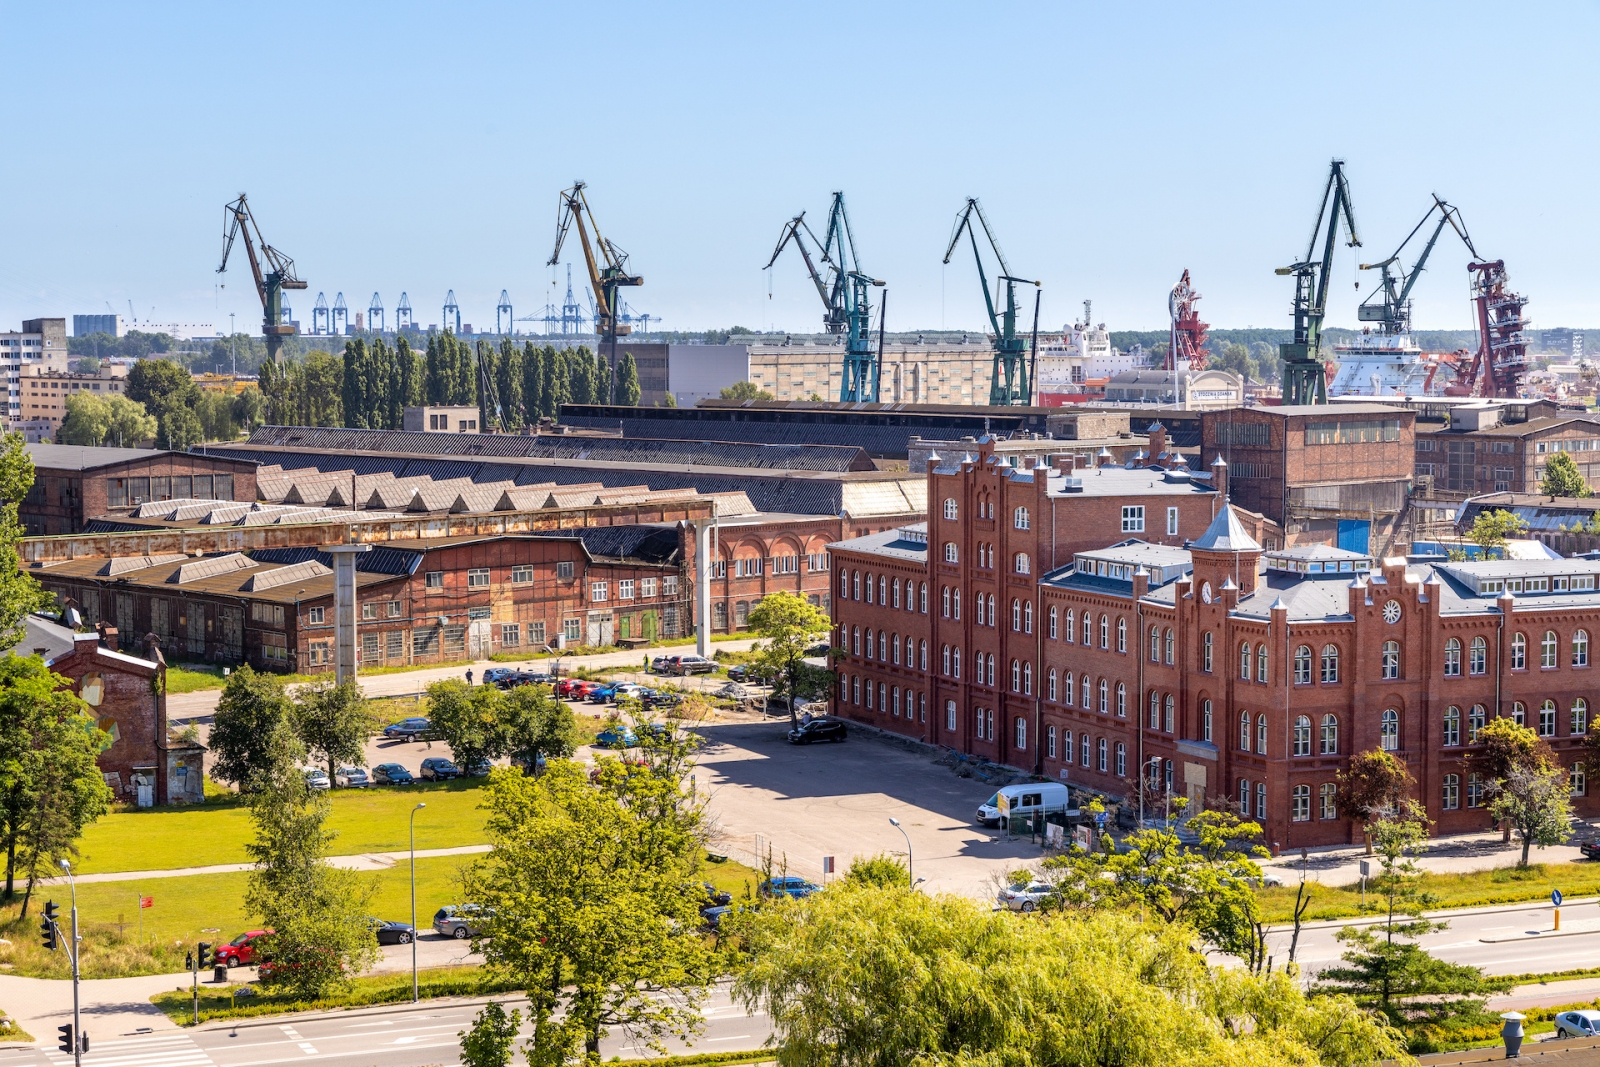 Panoramic view of Gdansk Shipyard industrial infrastructure near European Solidarity Centre building at Solidarnosci square in Gdansk, Poland